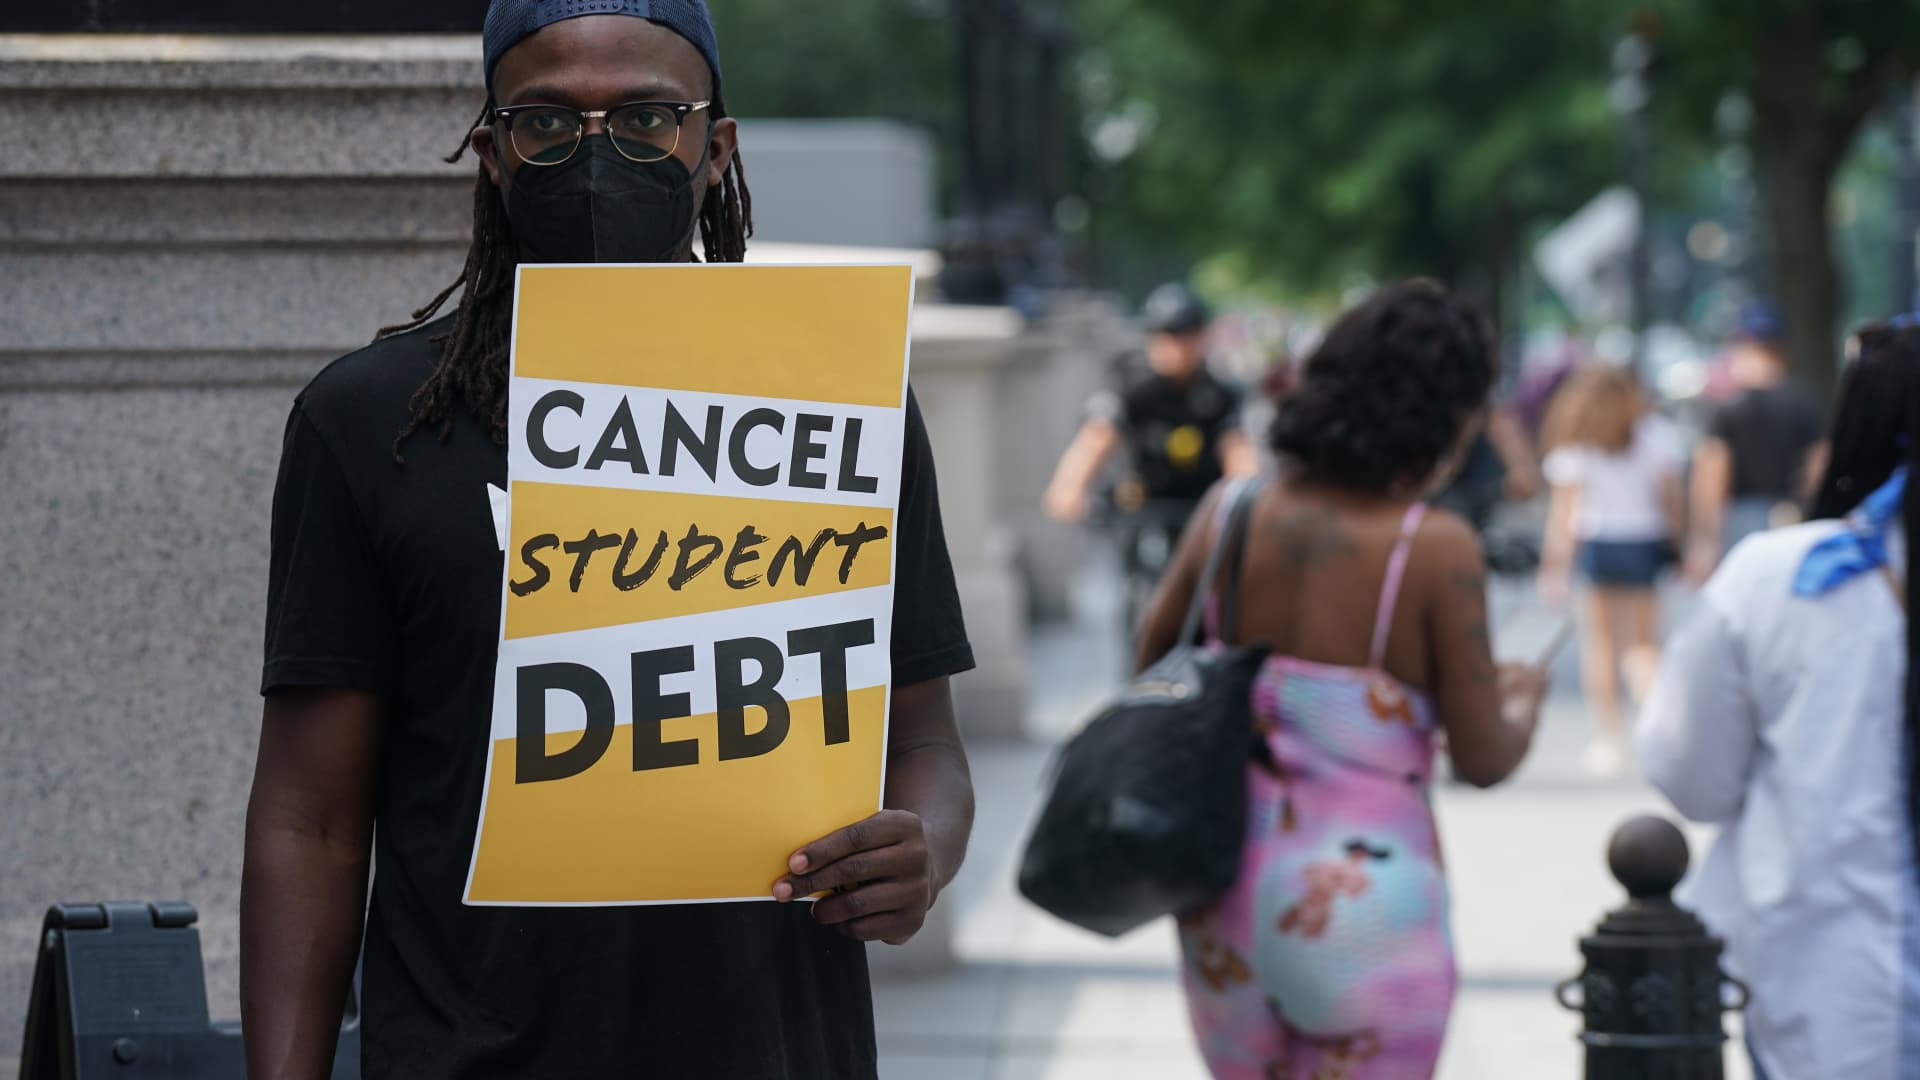 Changes are coming to improve student loan forgiveness for borrowers in public service